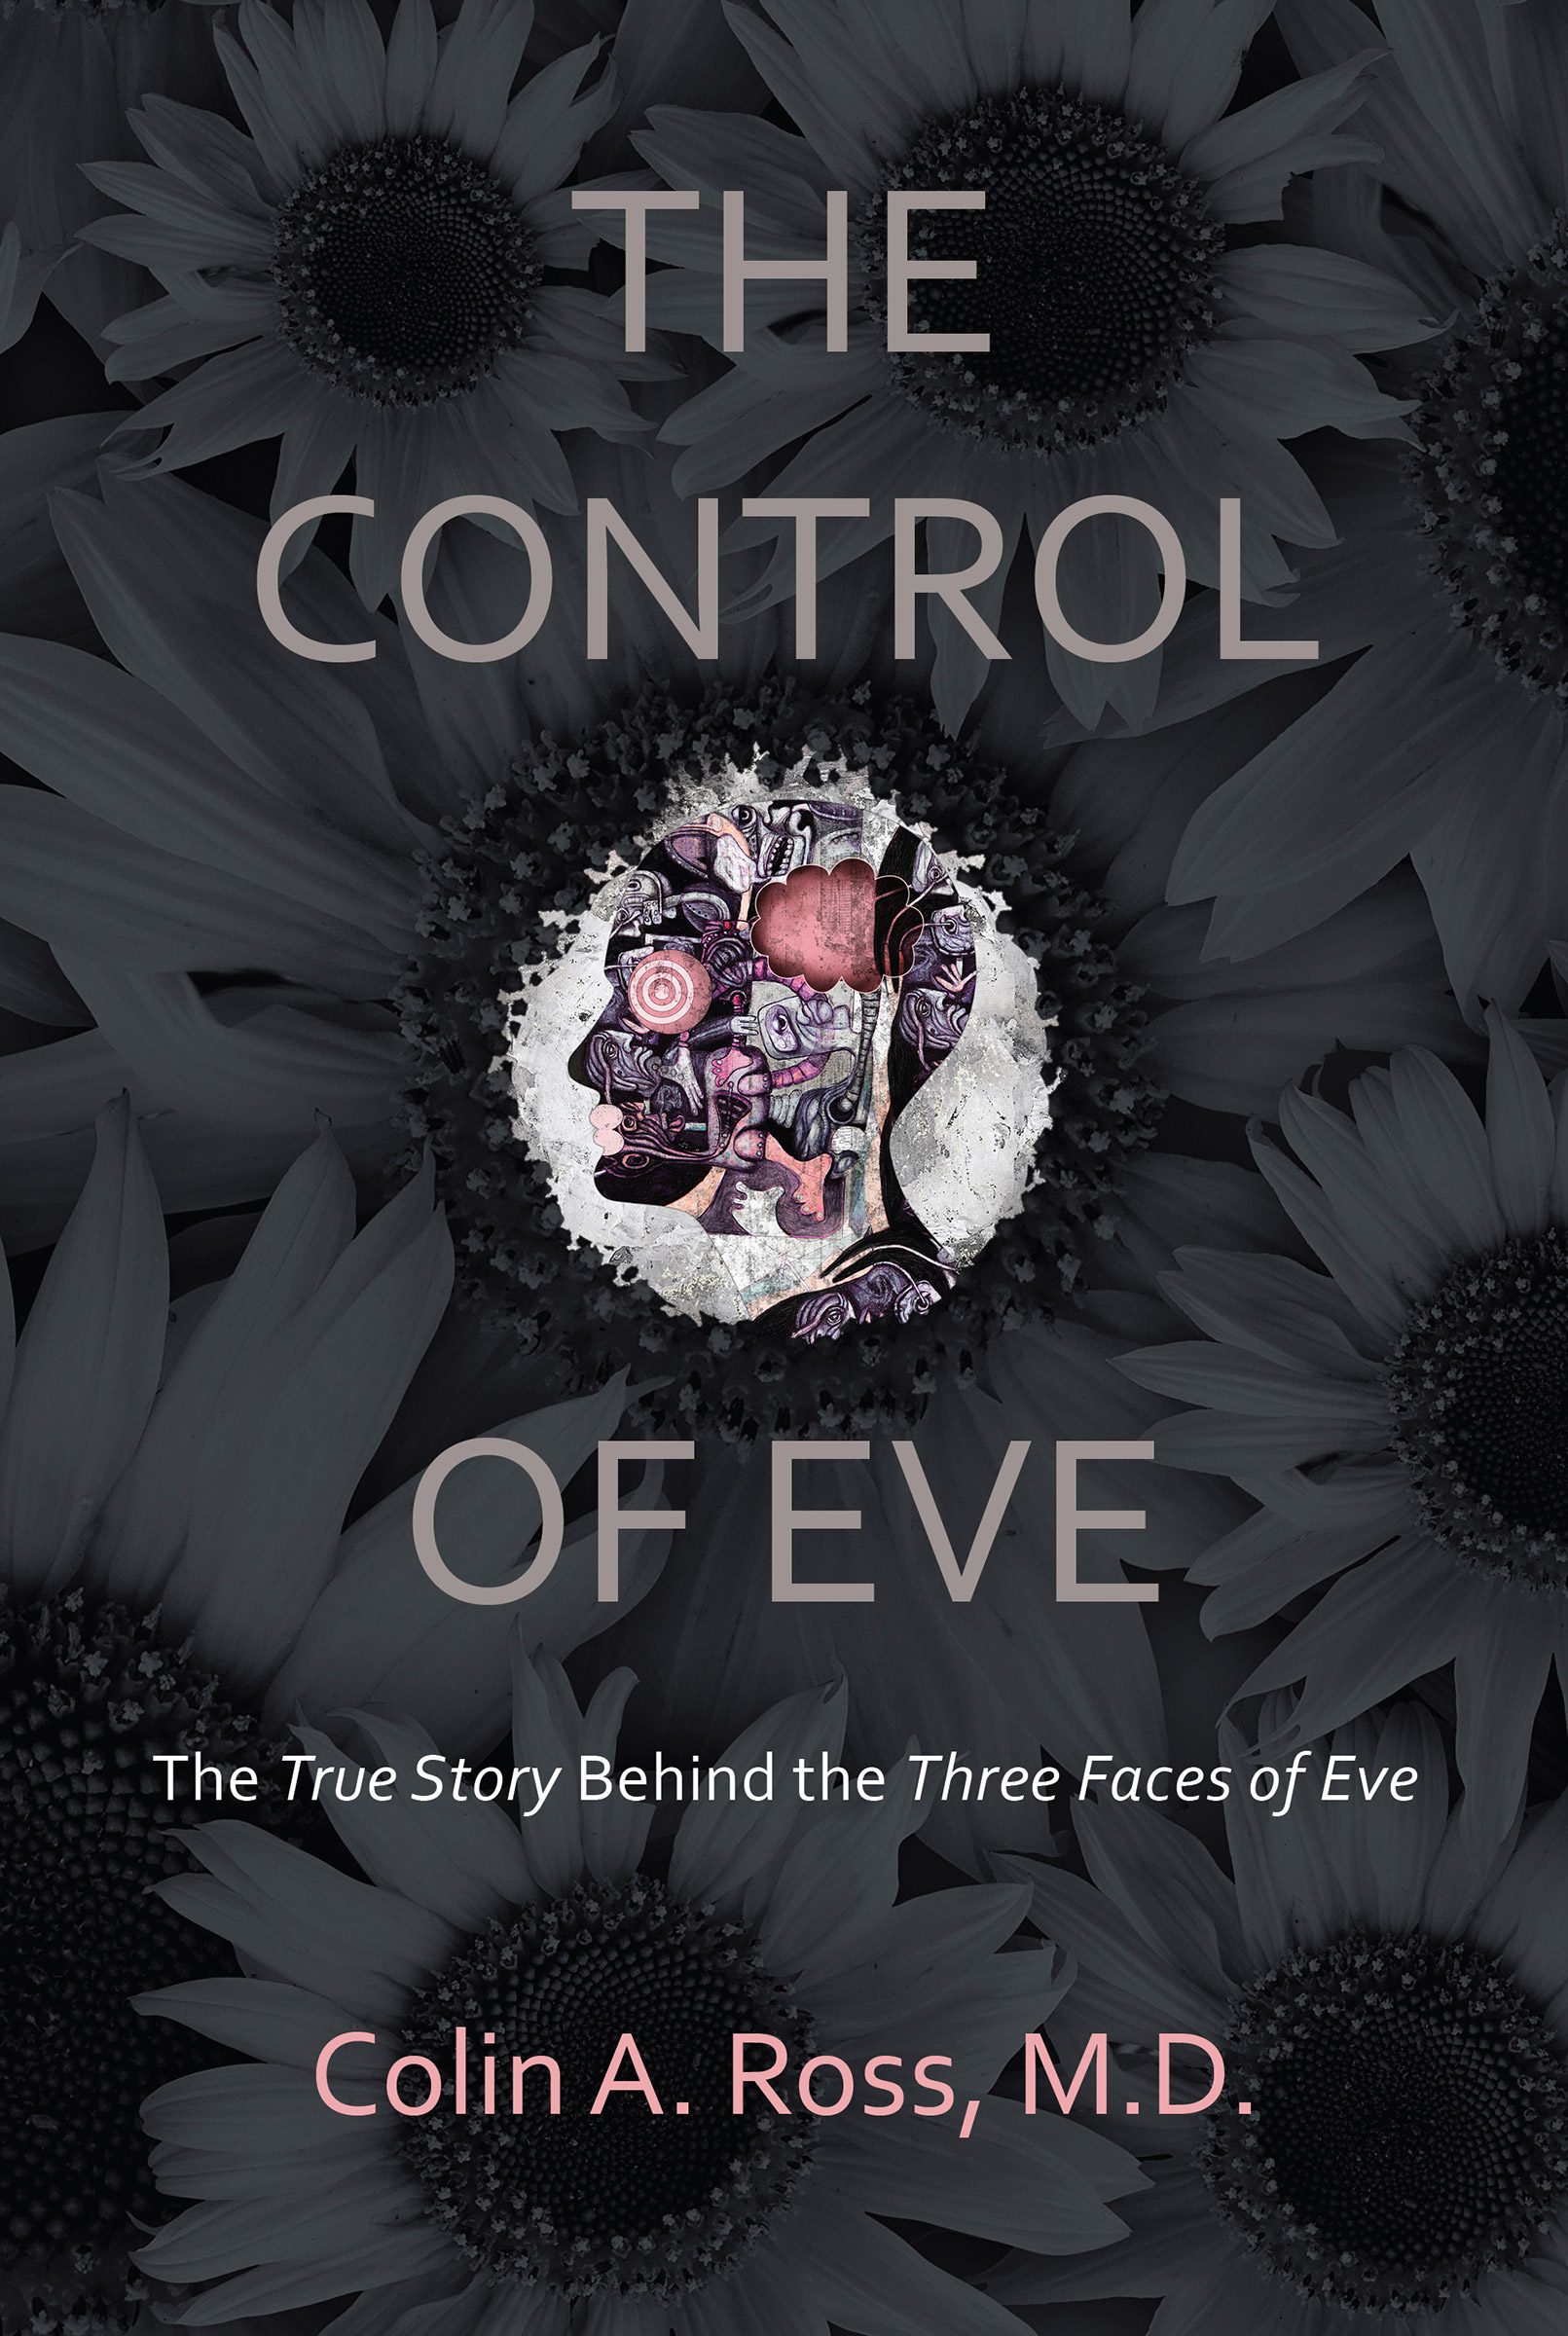 Control of Eve by Colin Ross